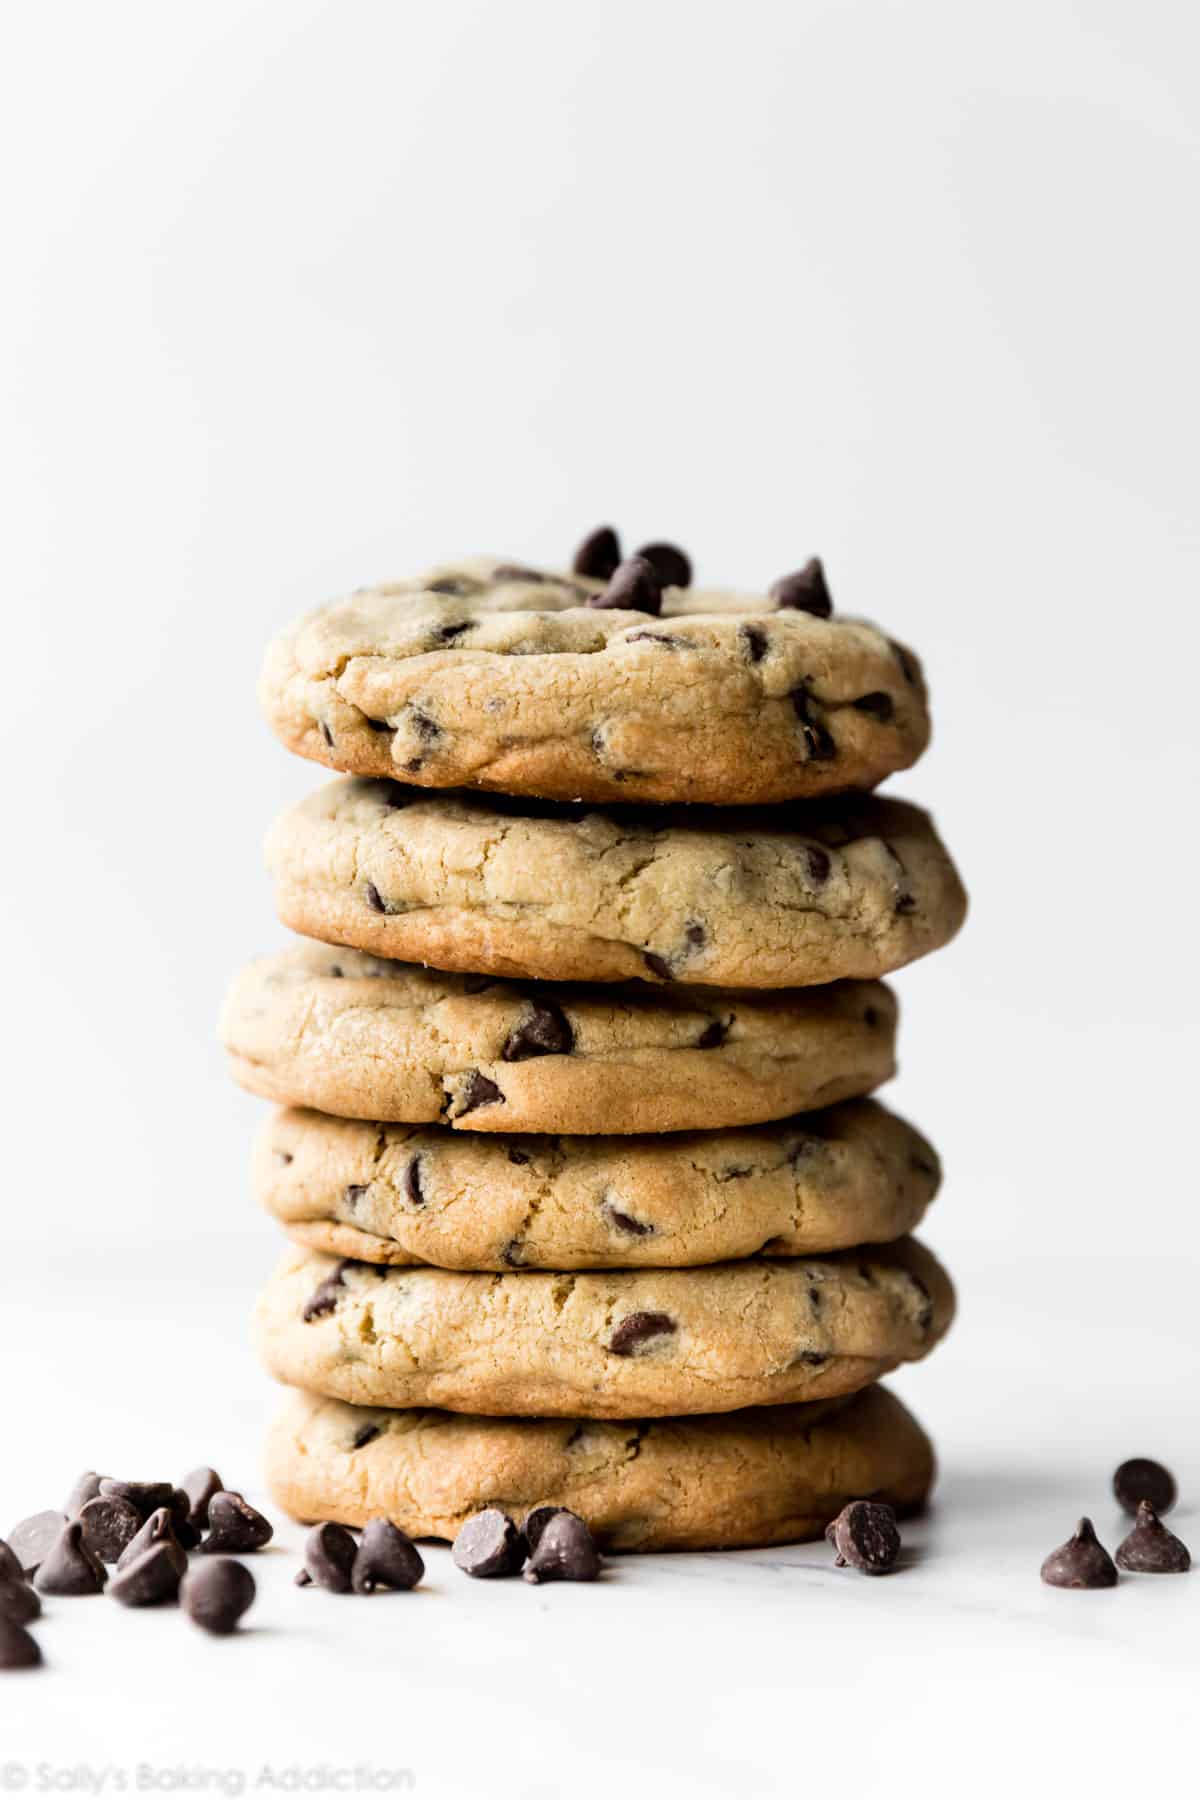 Stack of 6 giant chocolate chip cookies